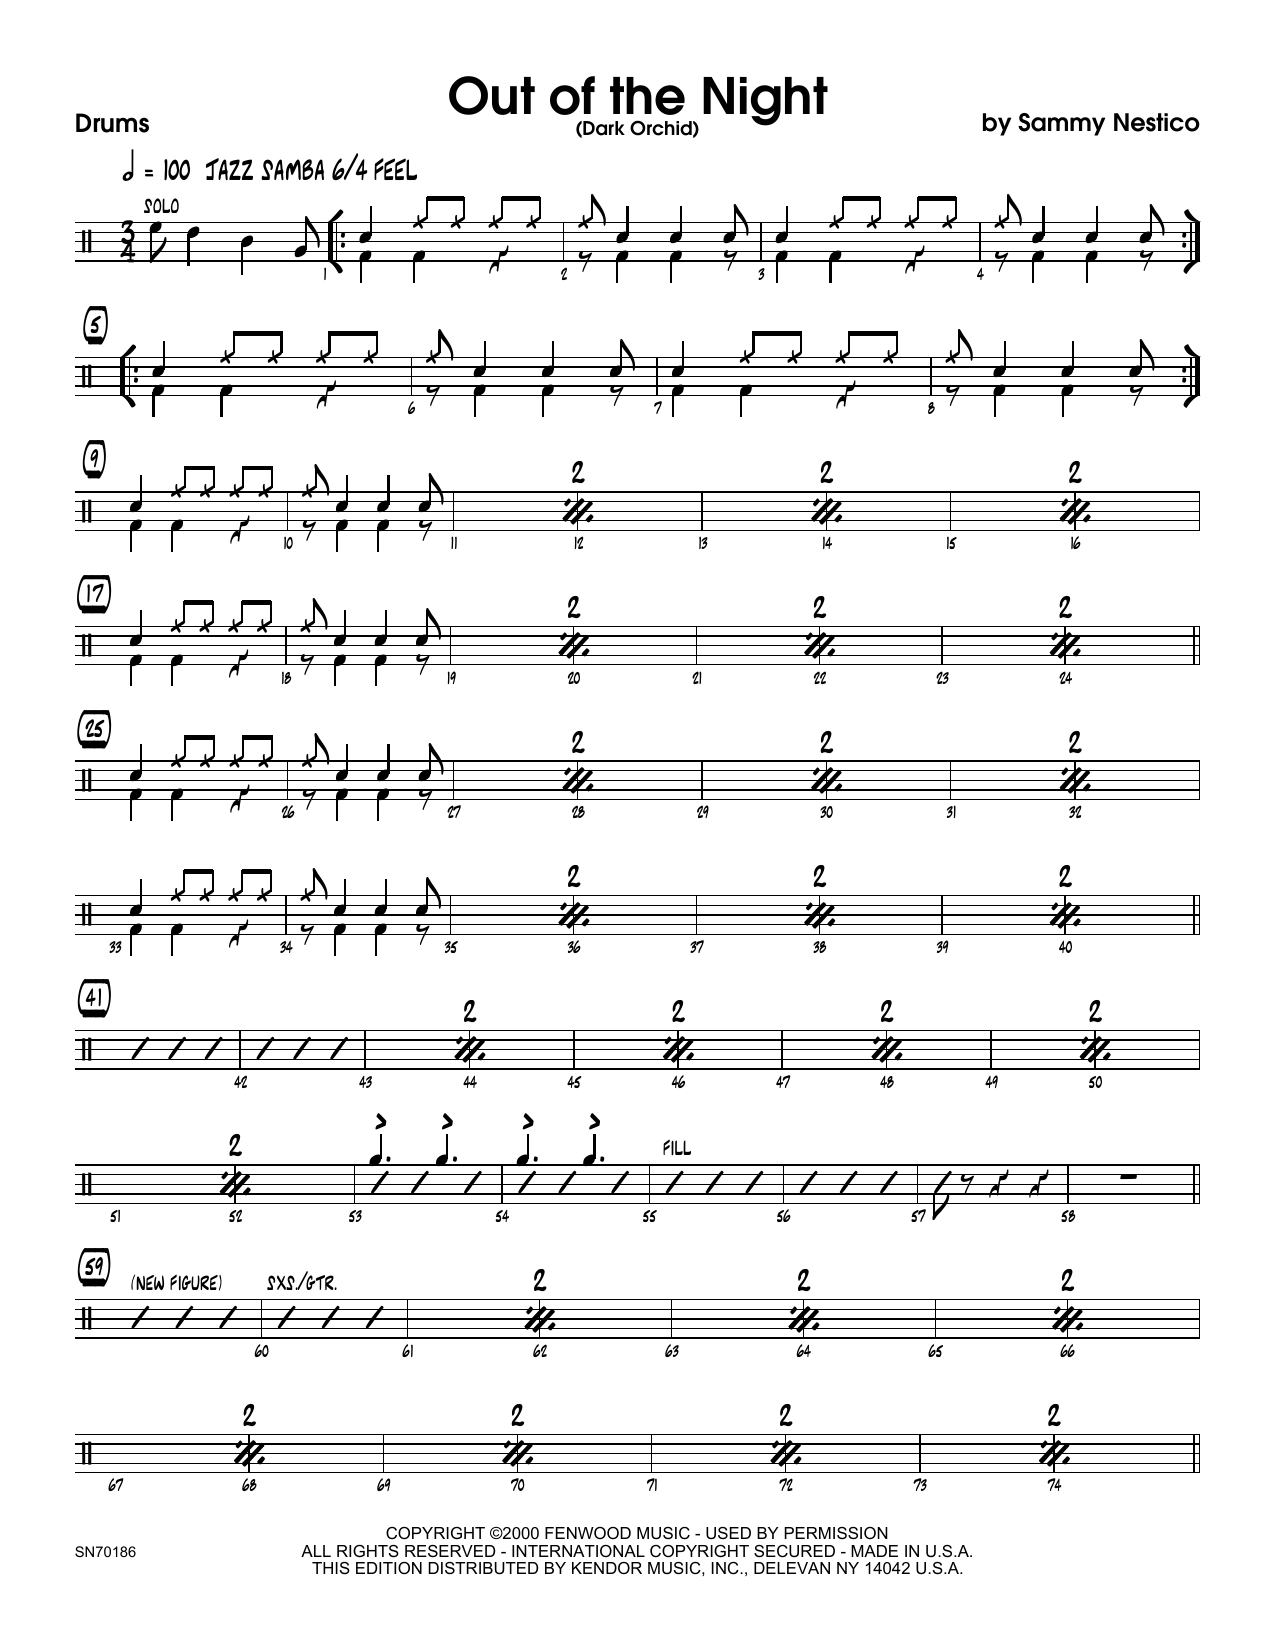 Download Sammy Nestico Out of the Night - Drum Set Sheet Music